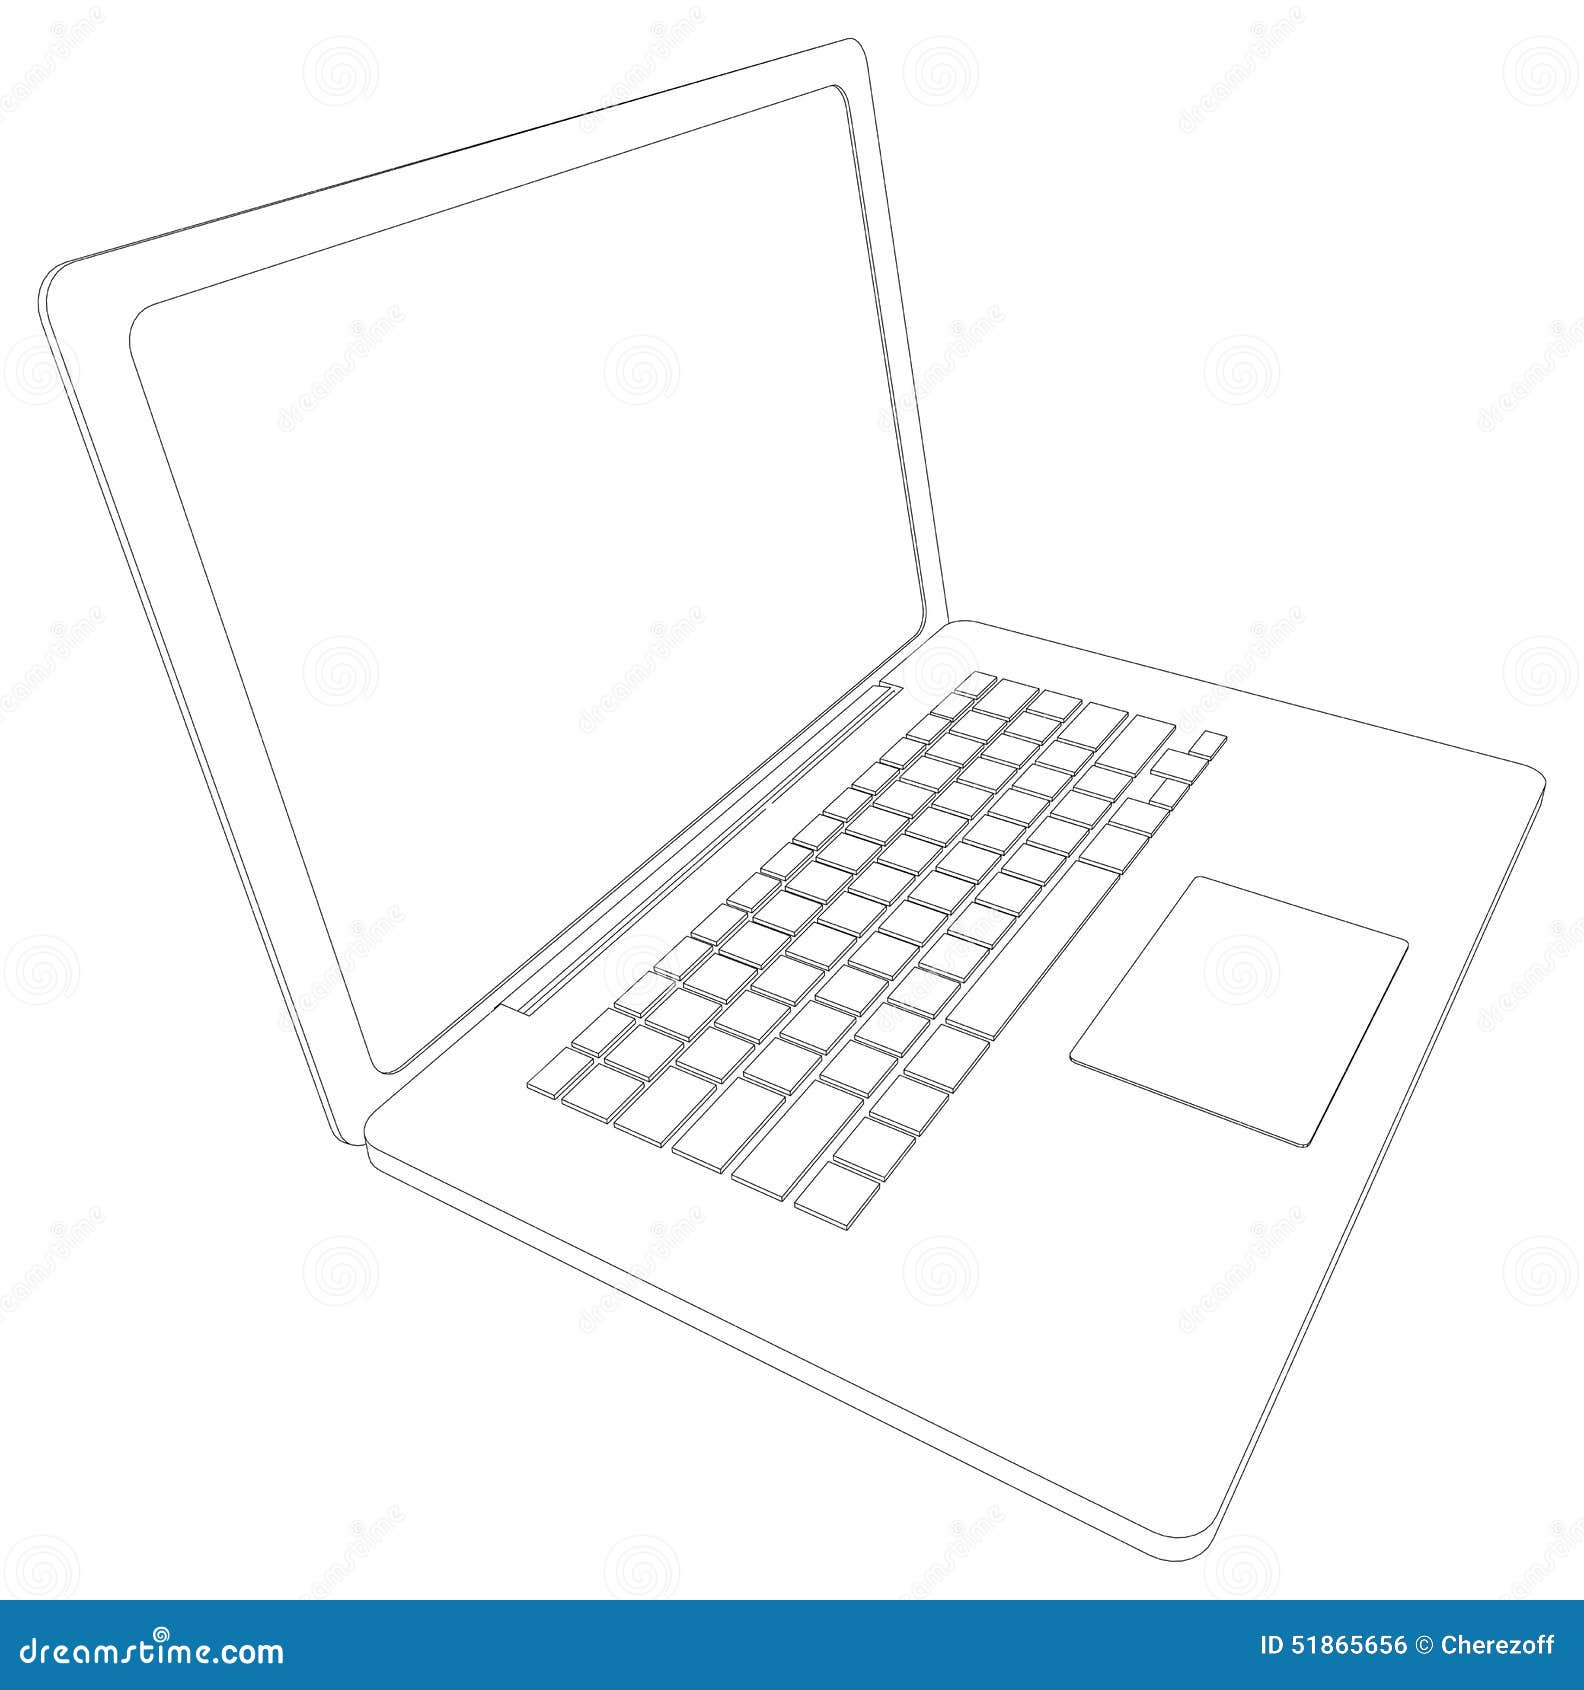 Drawing Of Wire-frame Open Laptop. Perspective Stock ...